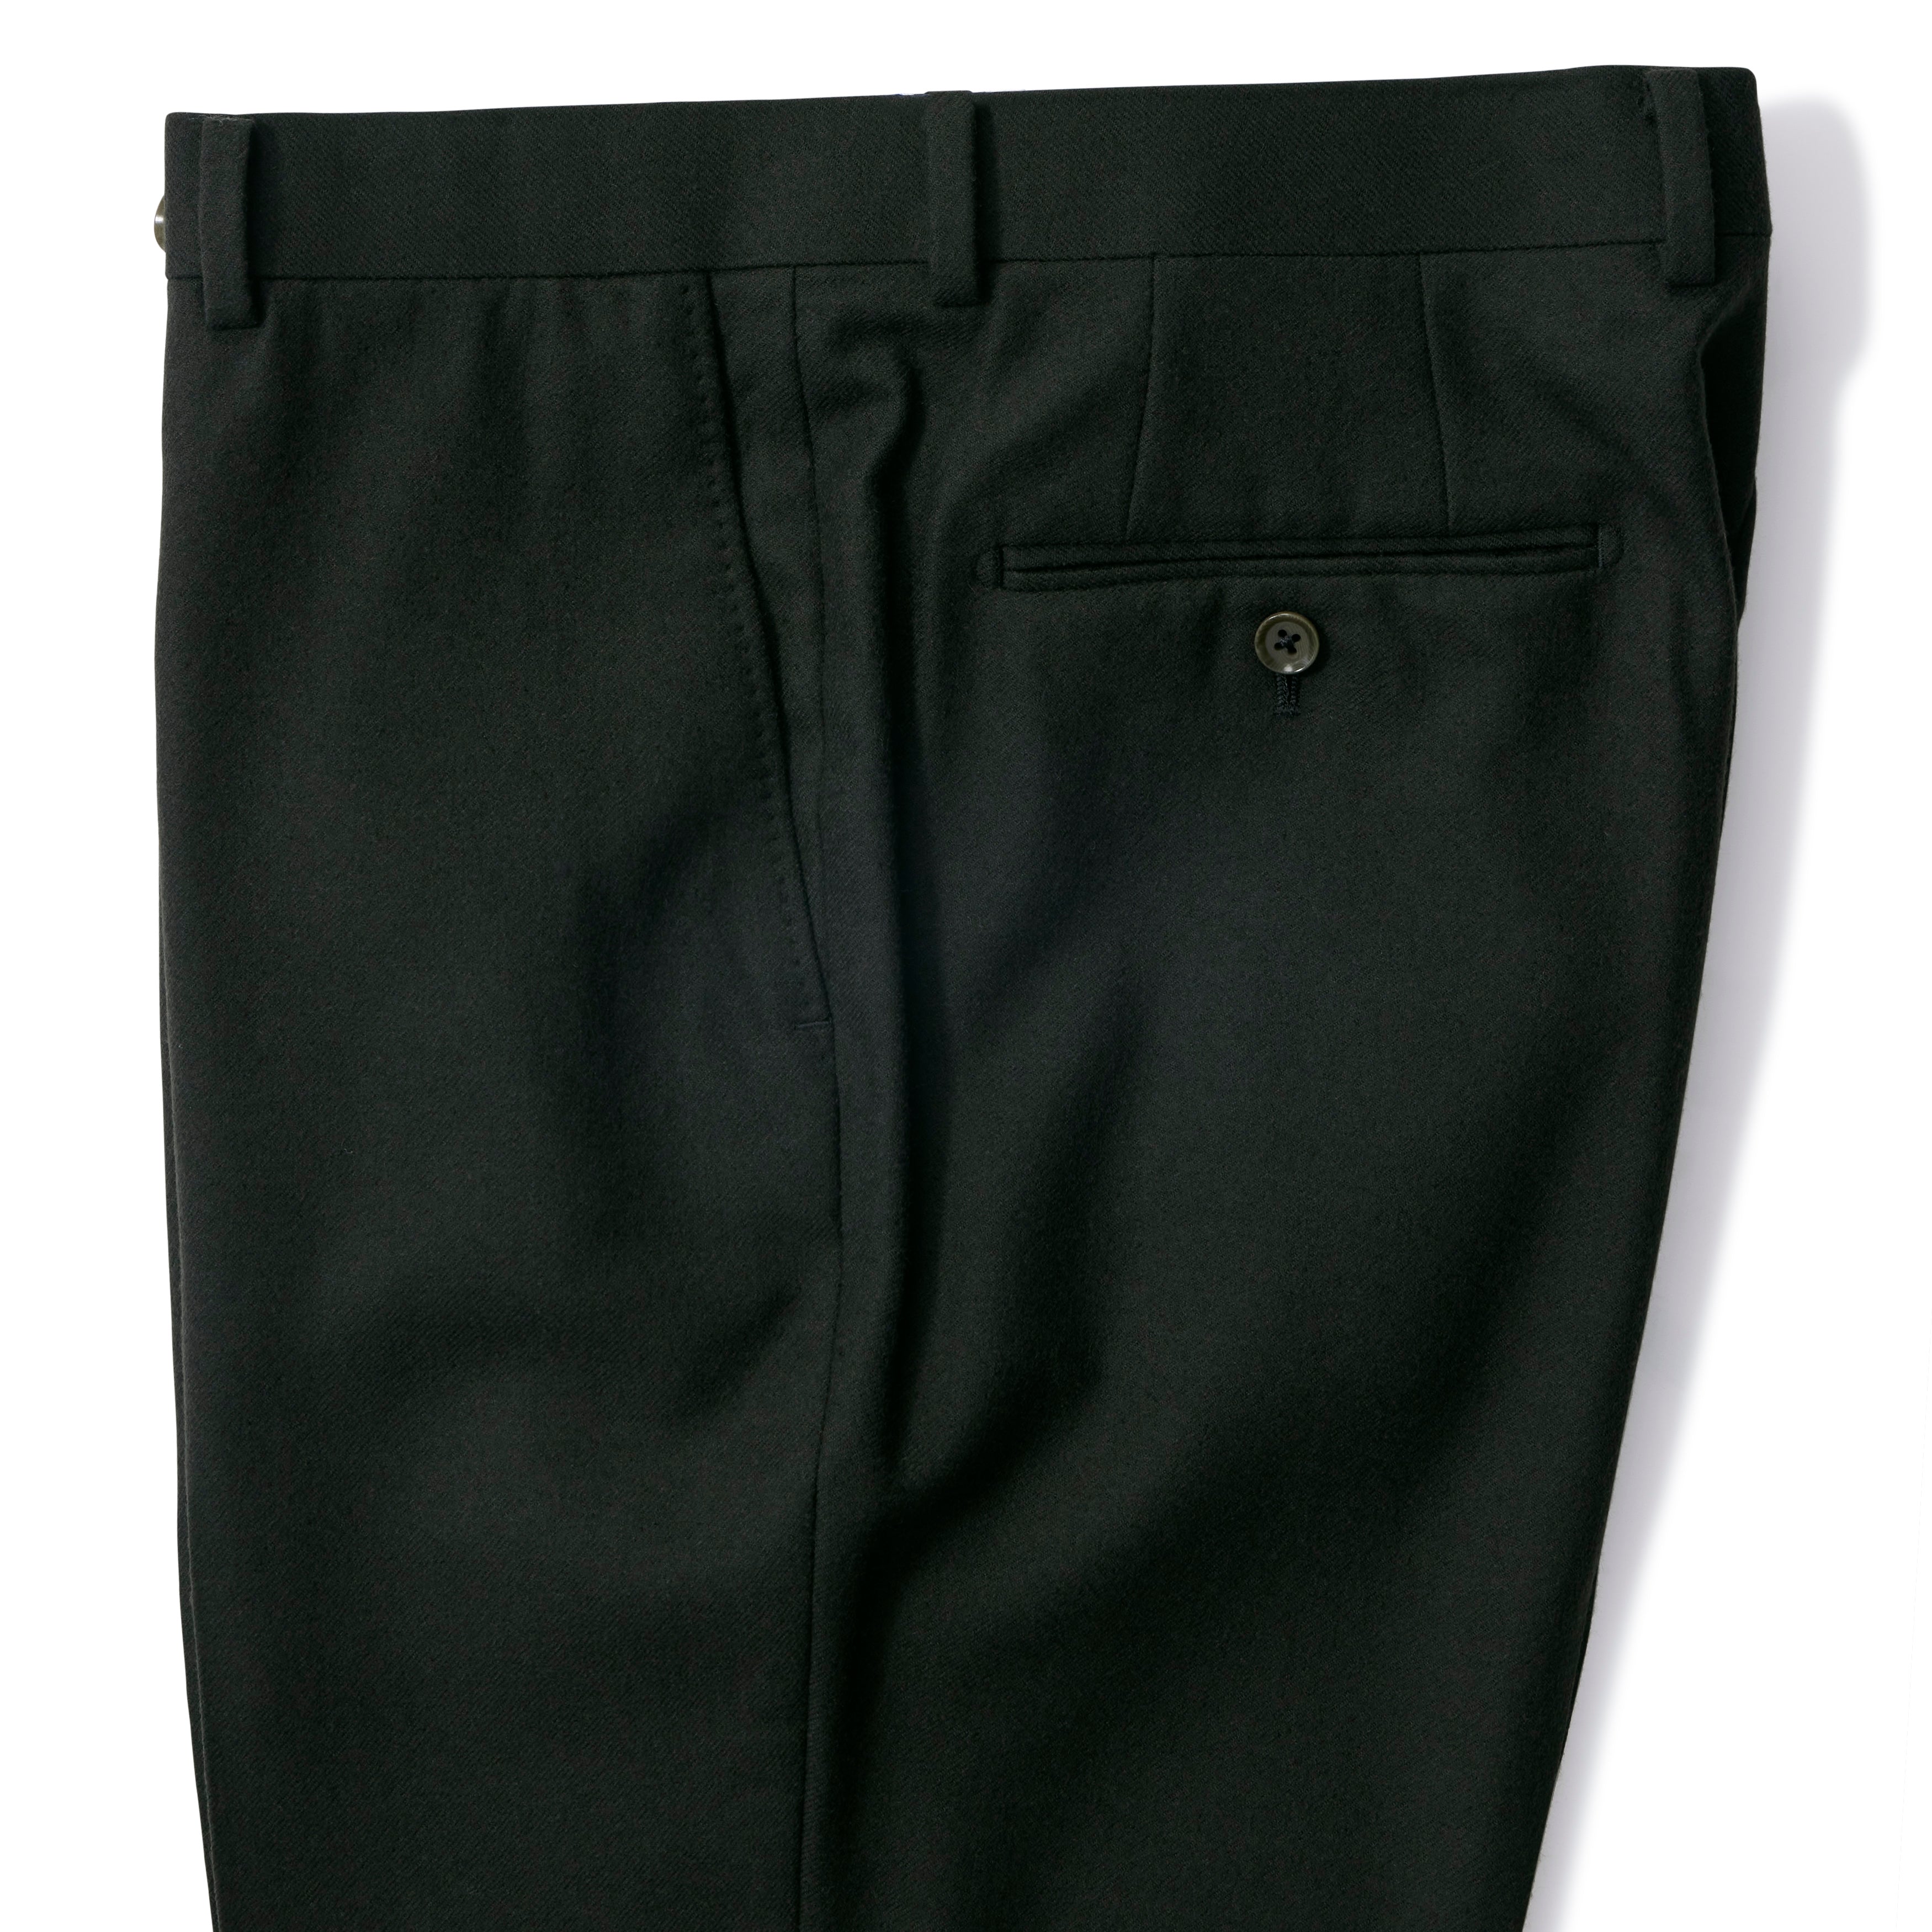 Wool Twill Model A Trousers - The Armoury